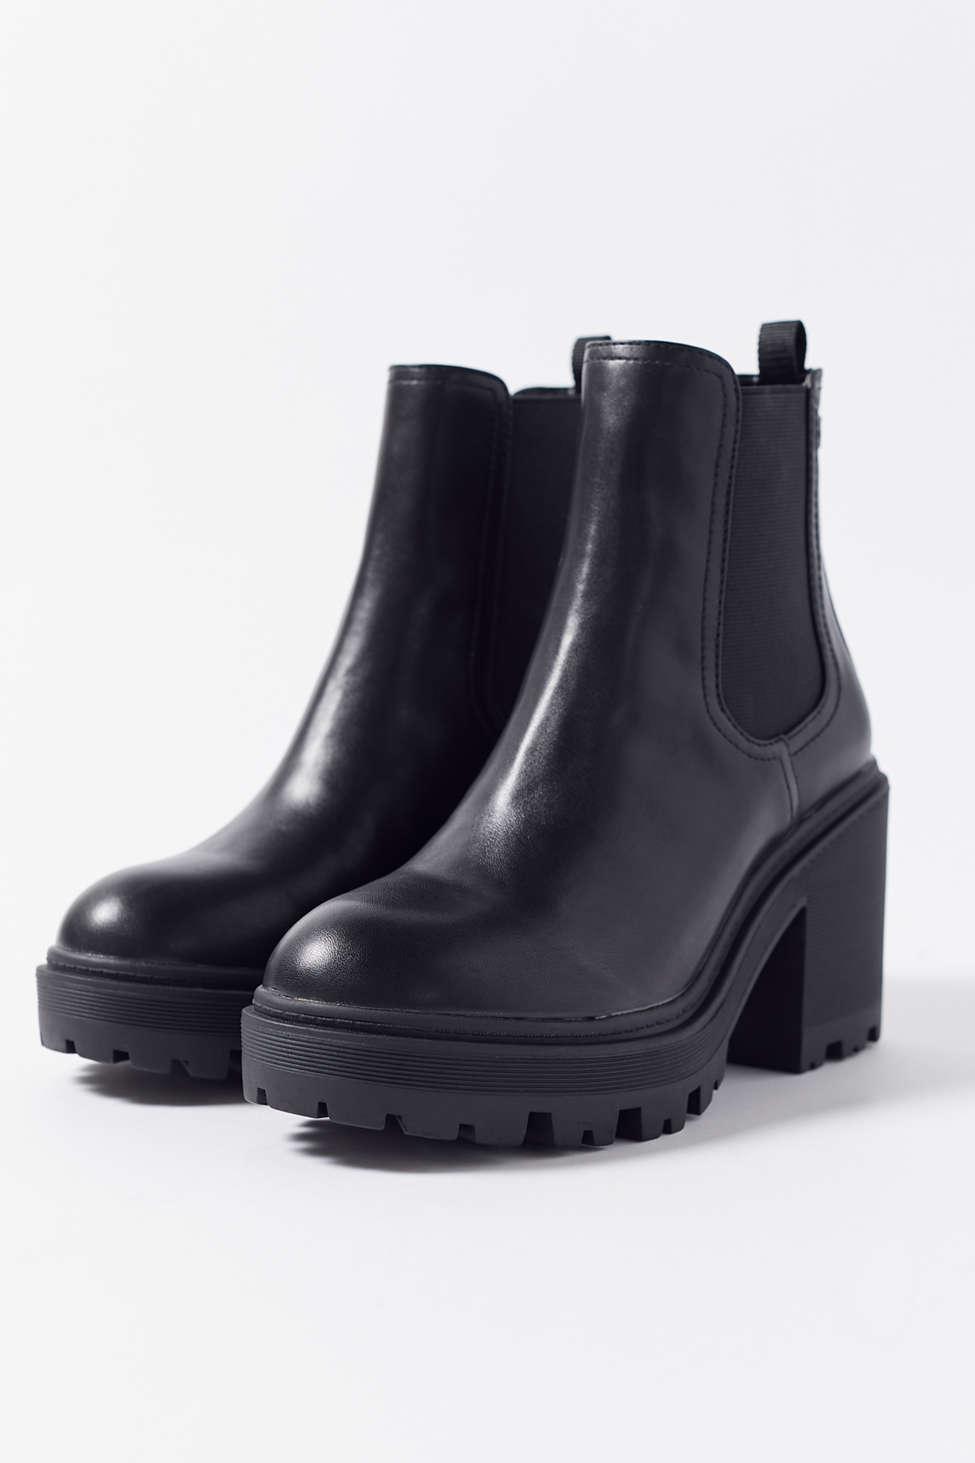 Urban Outfitters Uo Chloe Chelsea Timeless Classic Boot in Black | Lyst